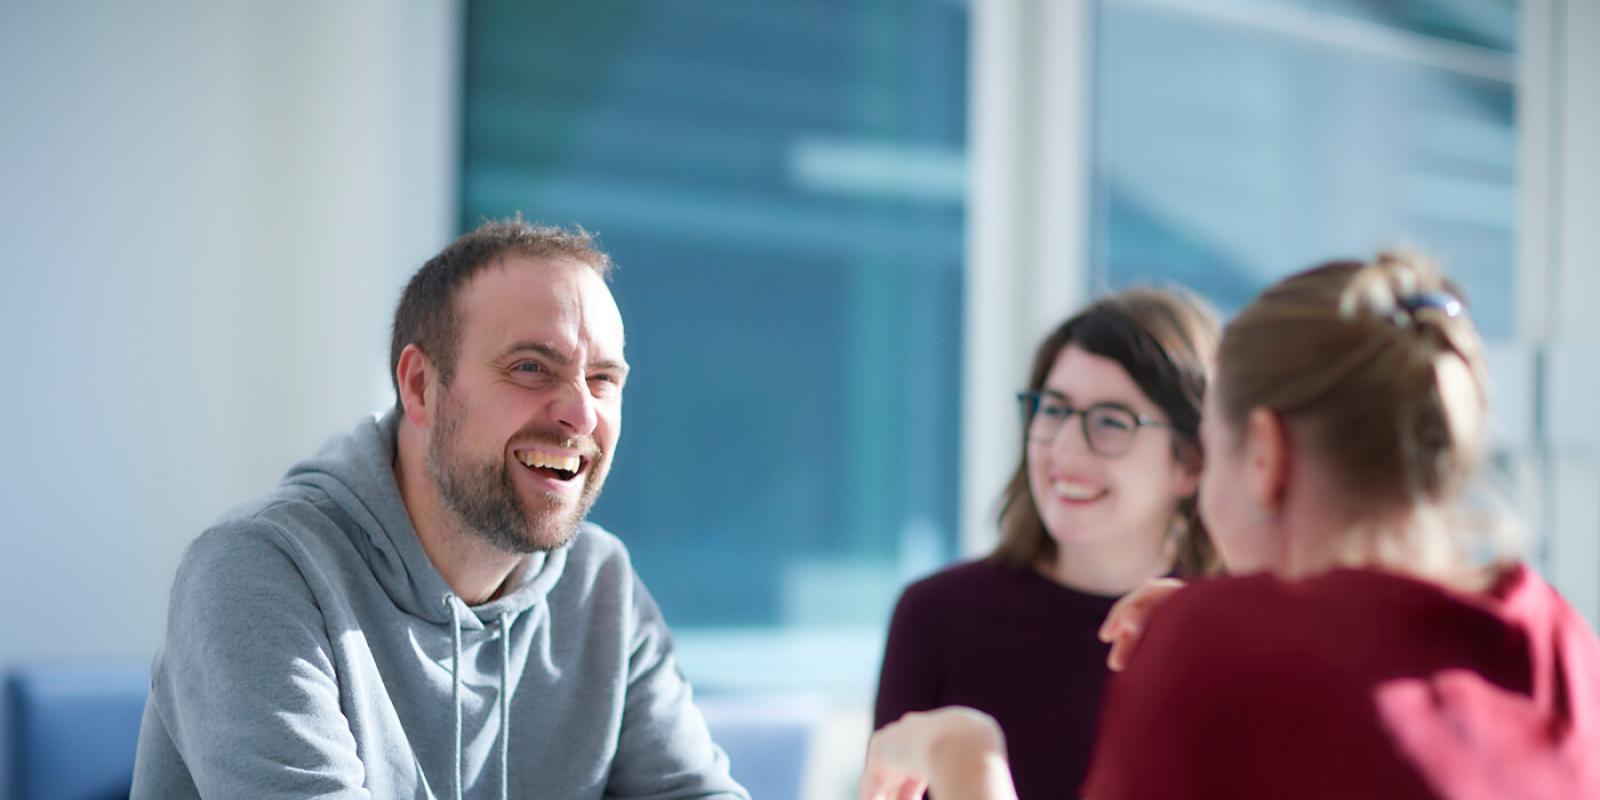 Man laughing with two women in meeting